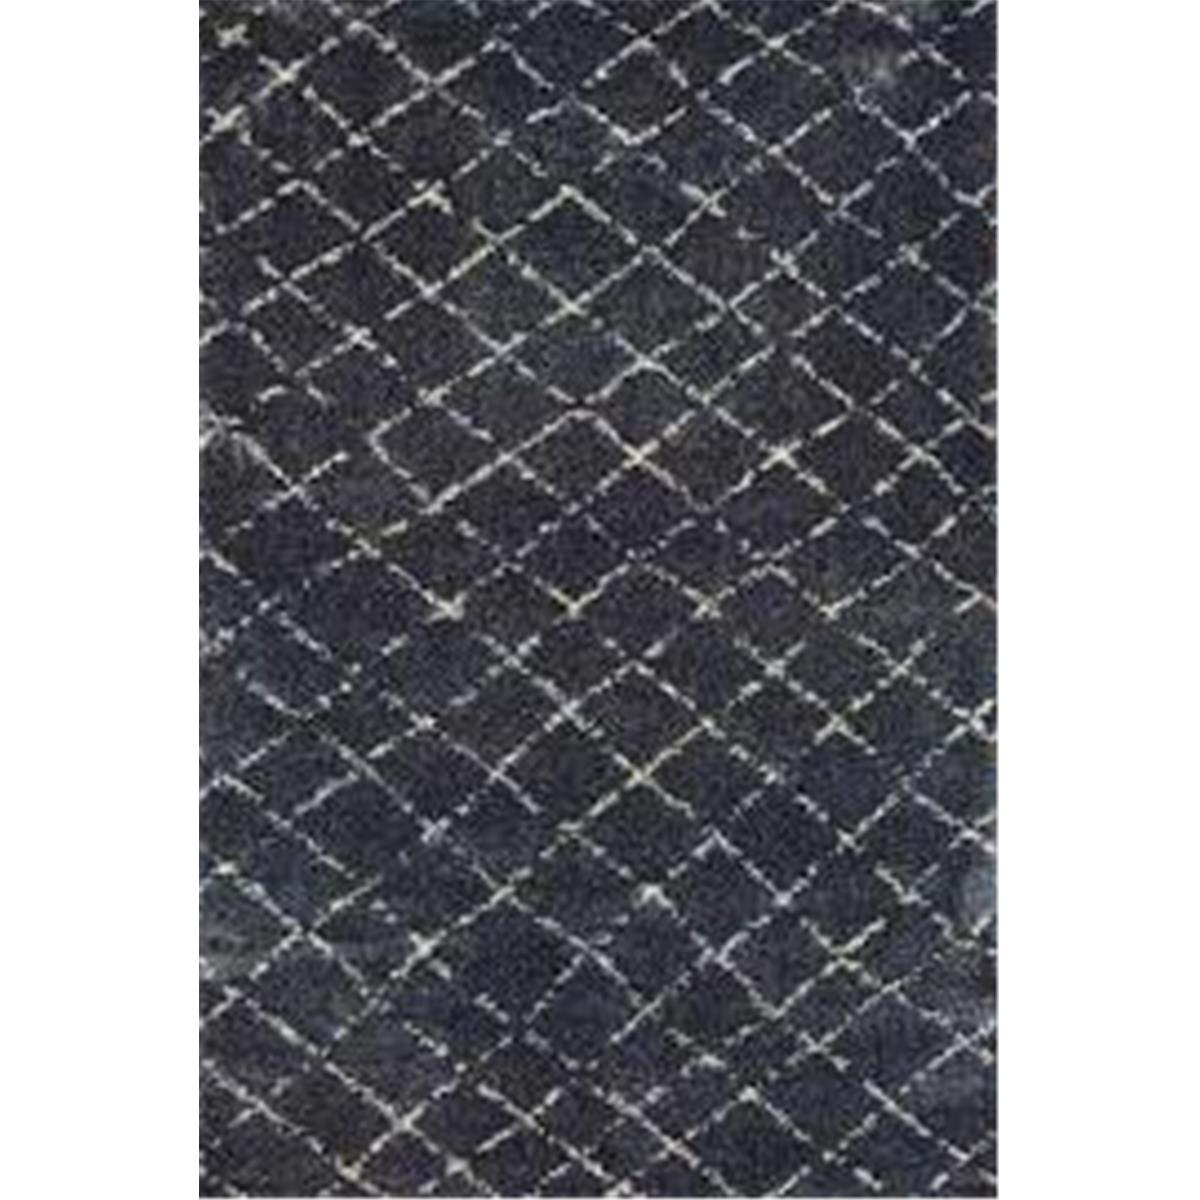 43317459022710u 2 Ft. 2 In. X 7 Ft. 10 In. Bromley Gio Rug, Navy & Grey